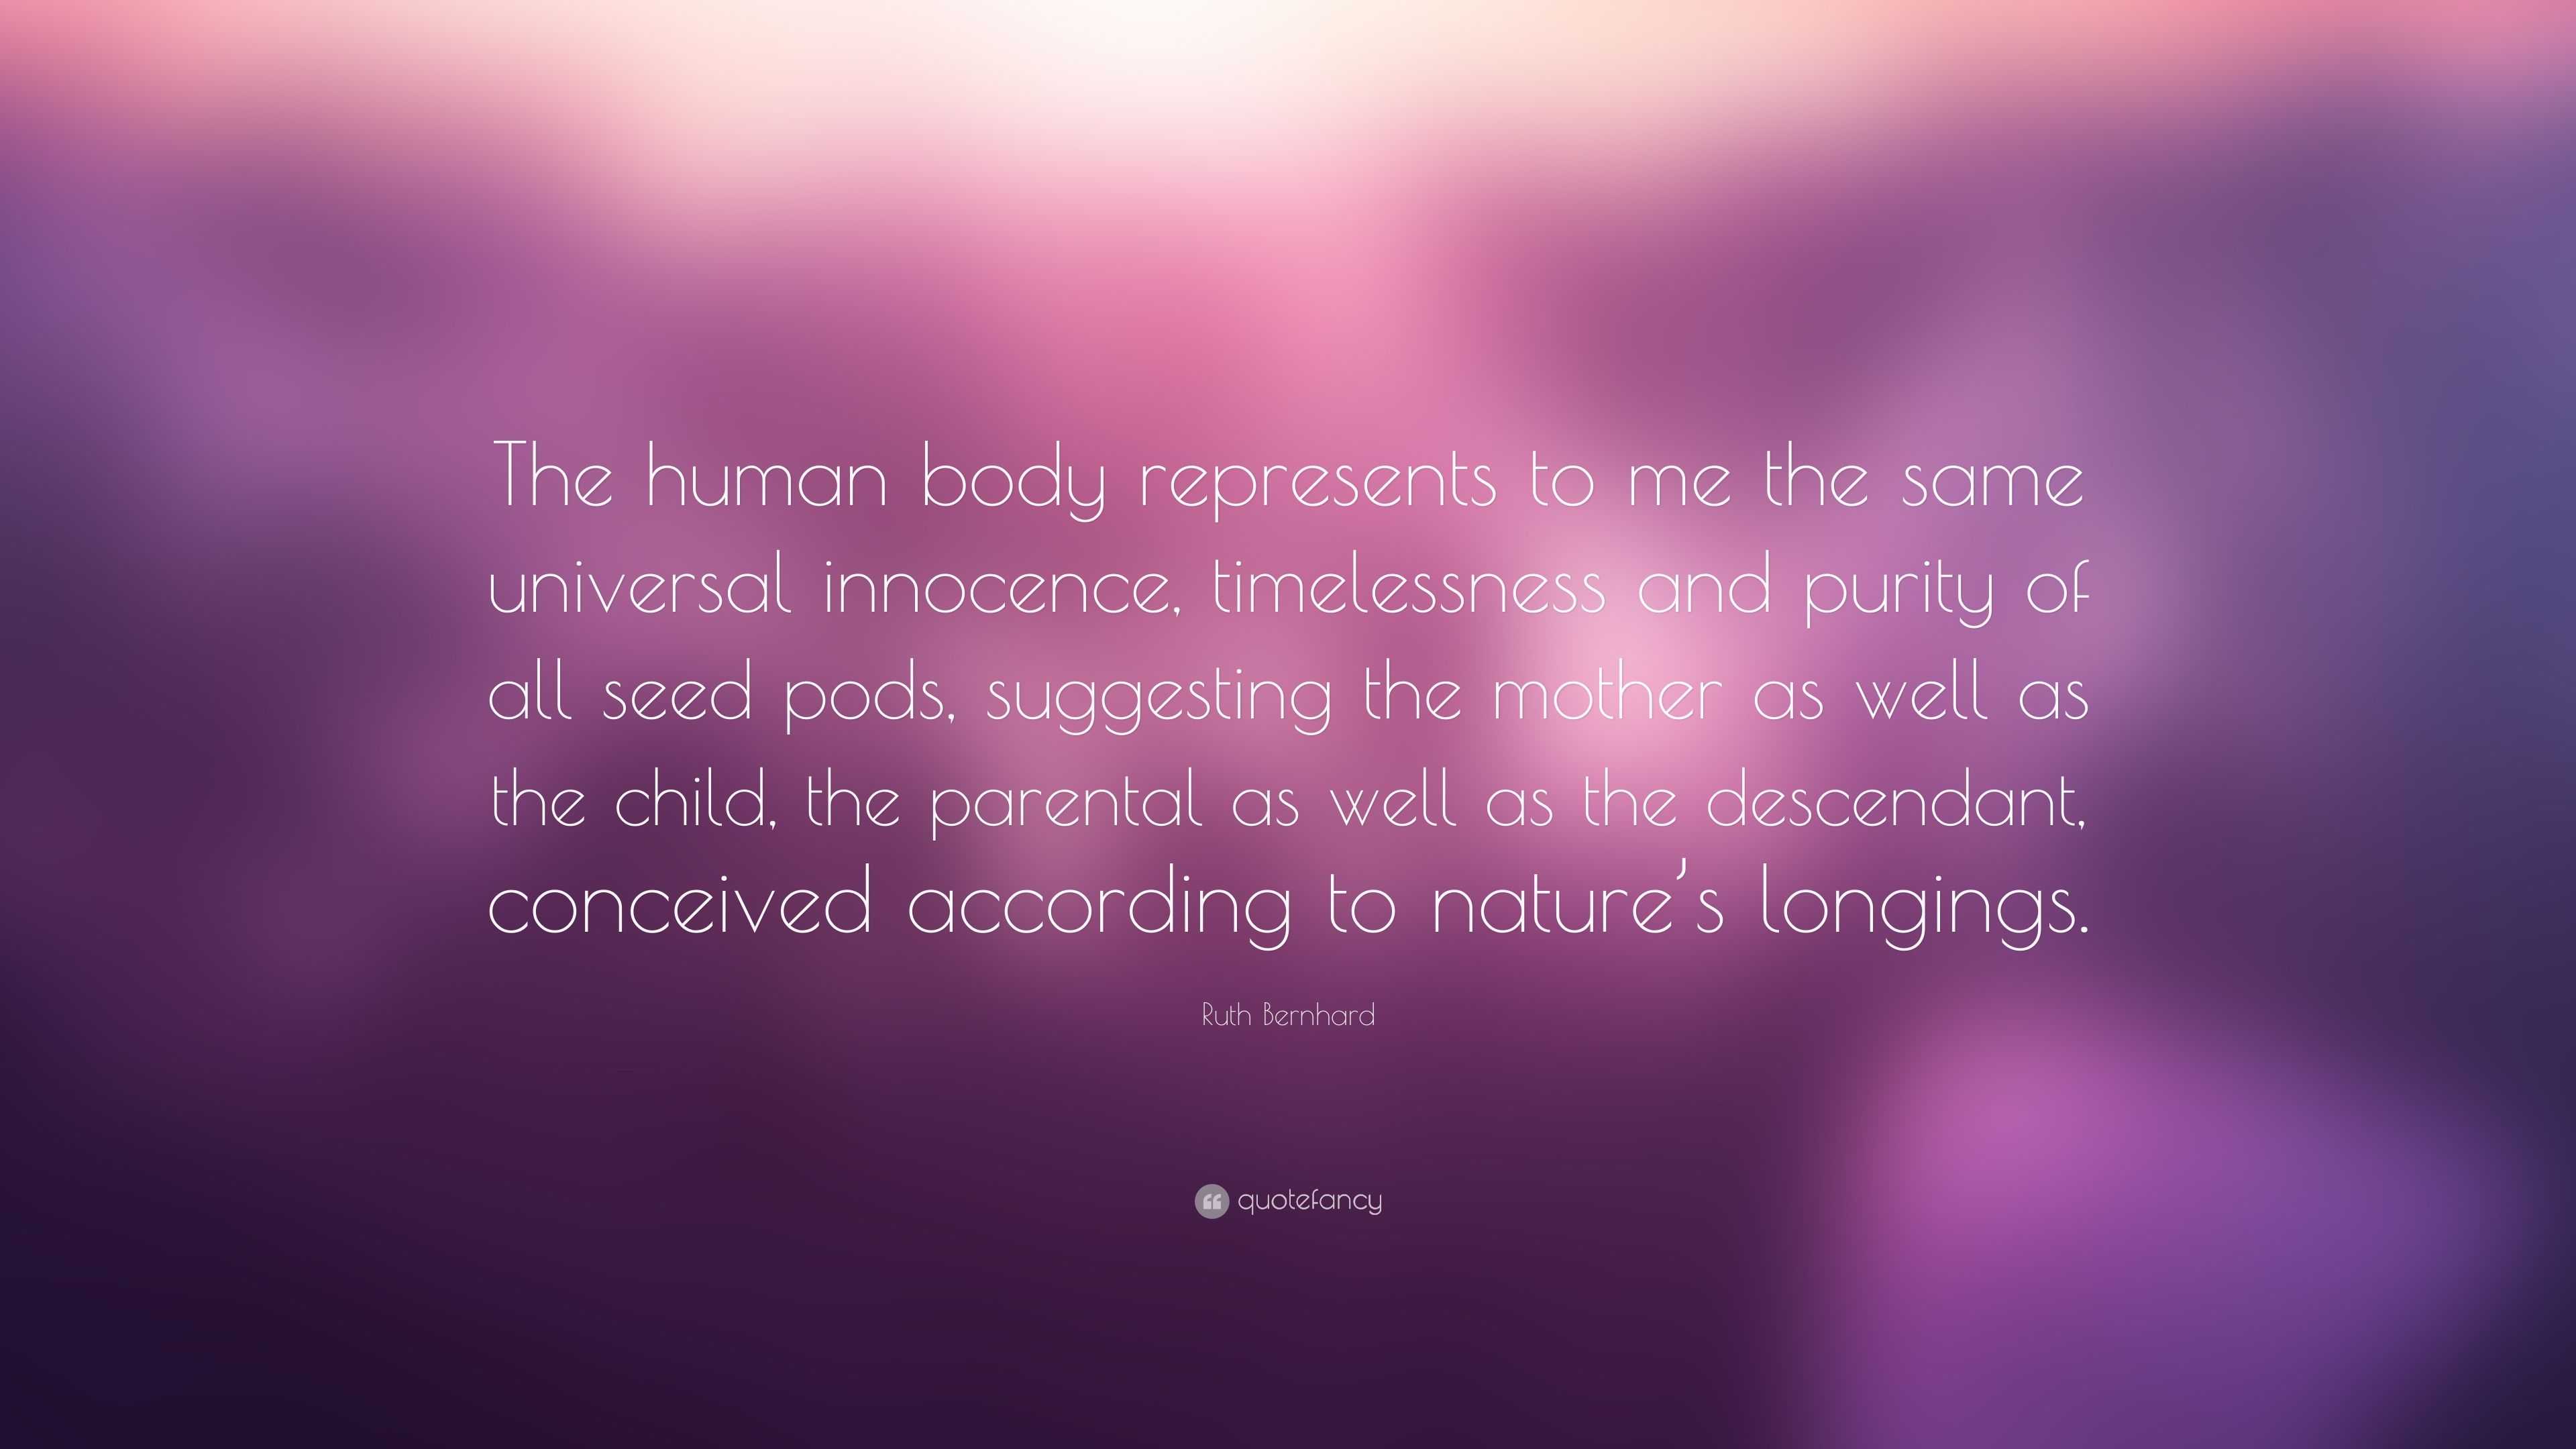 Ruth Bernhard Quote: “The human body represents to me the same ...